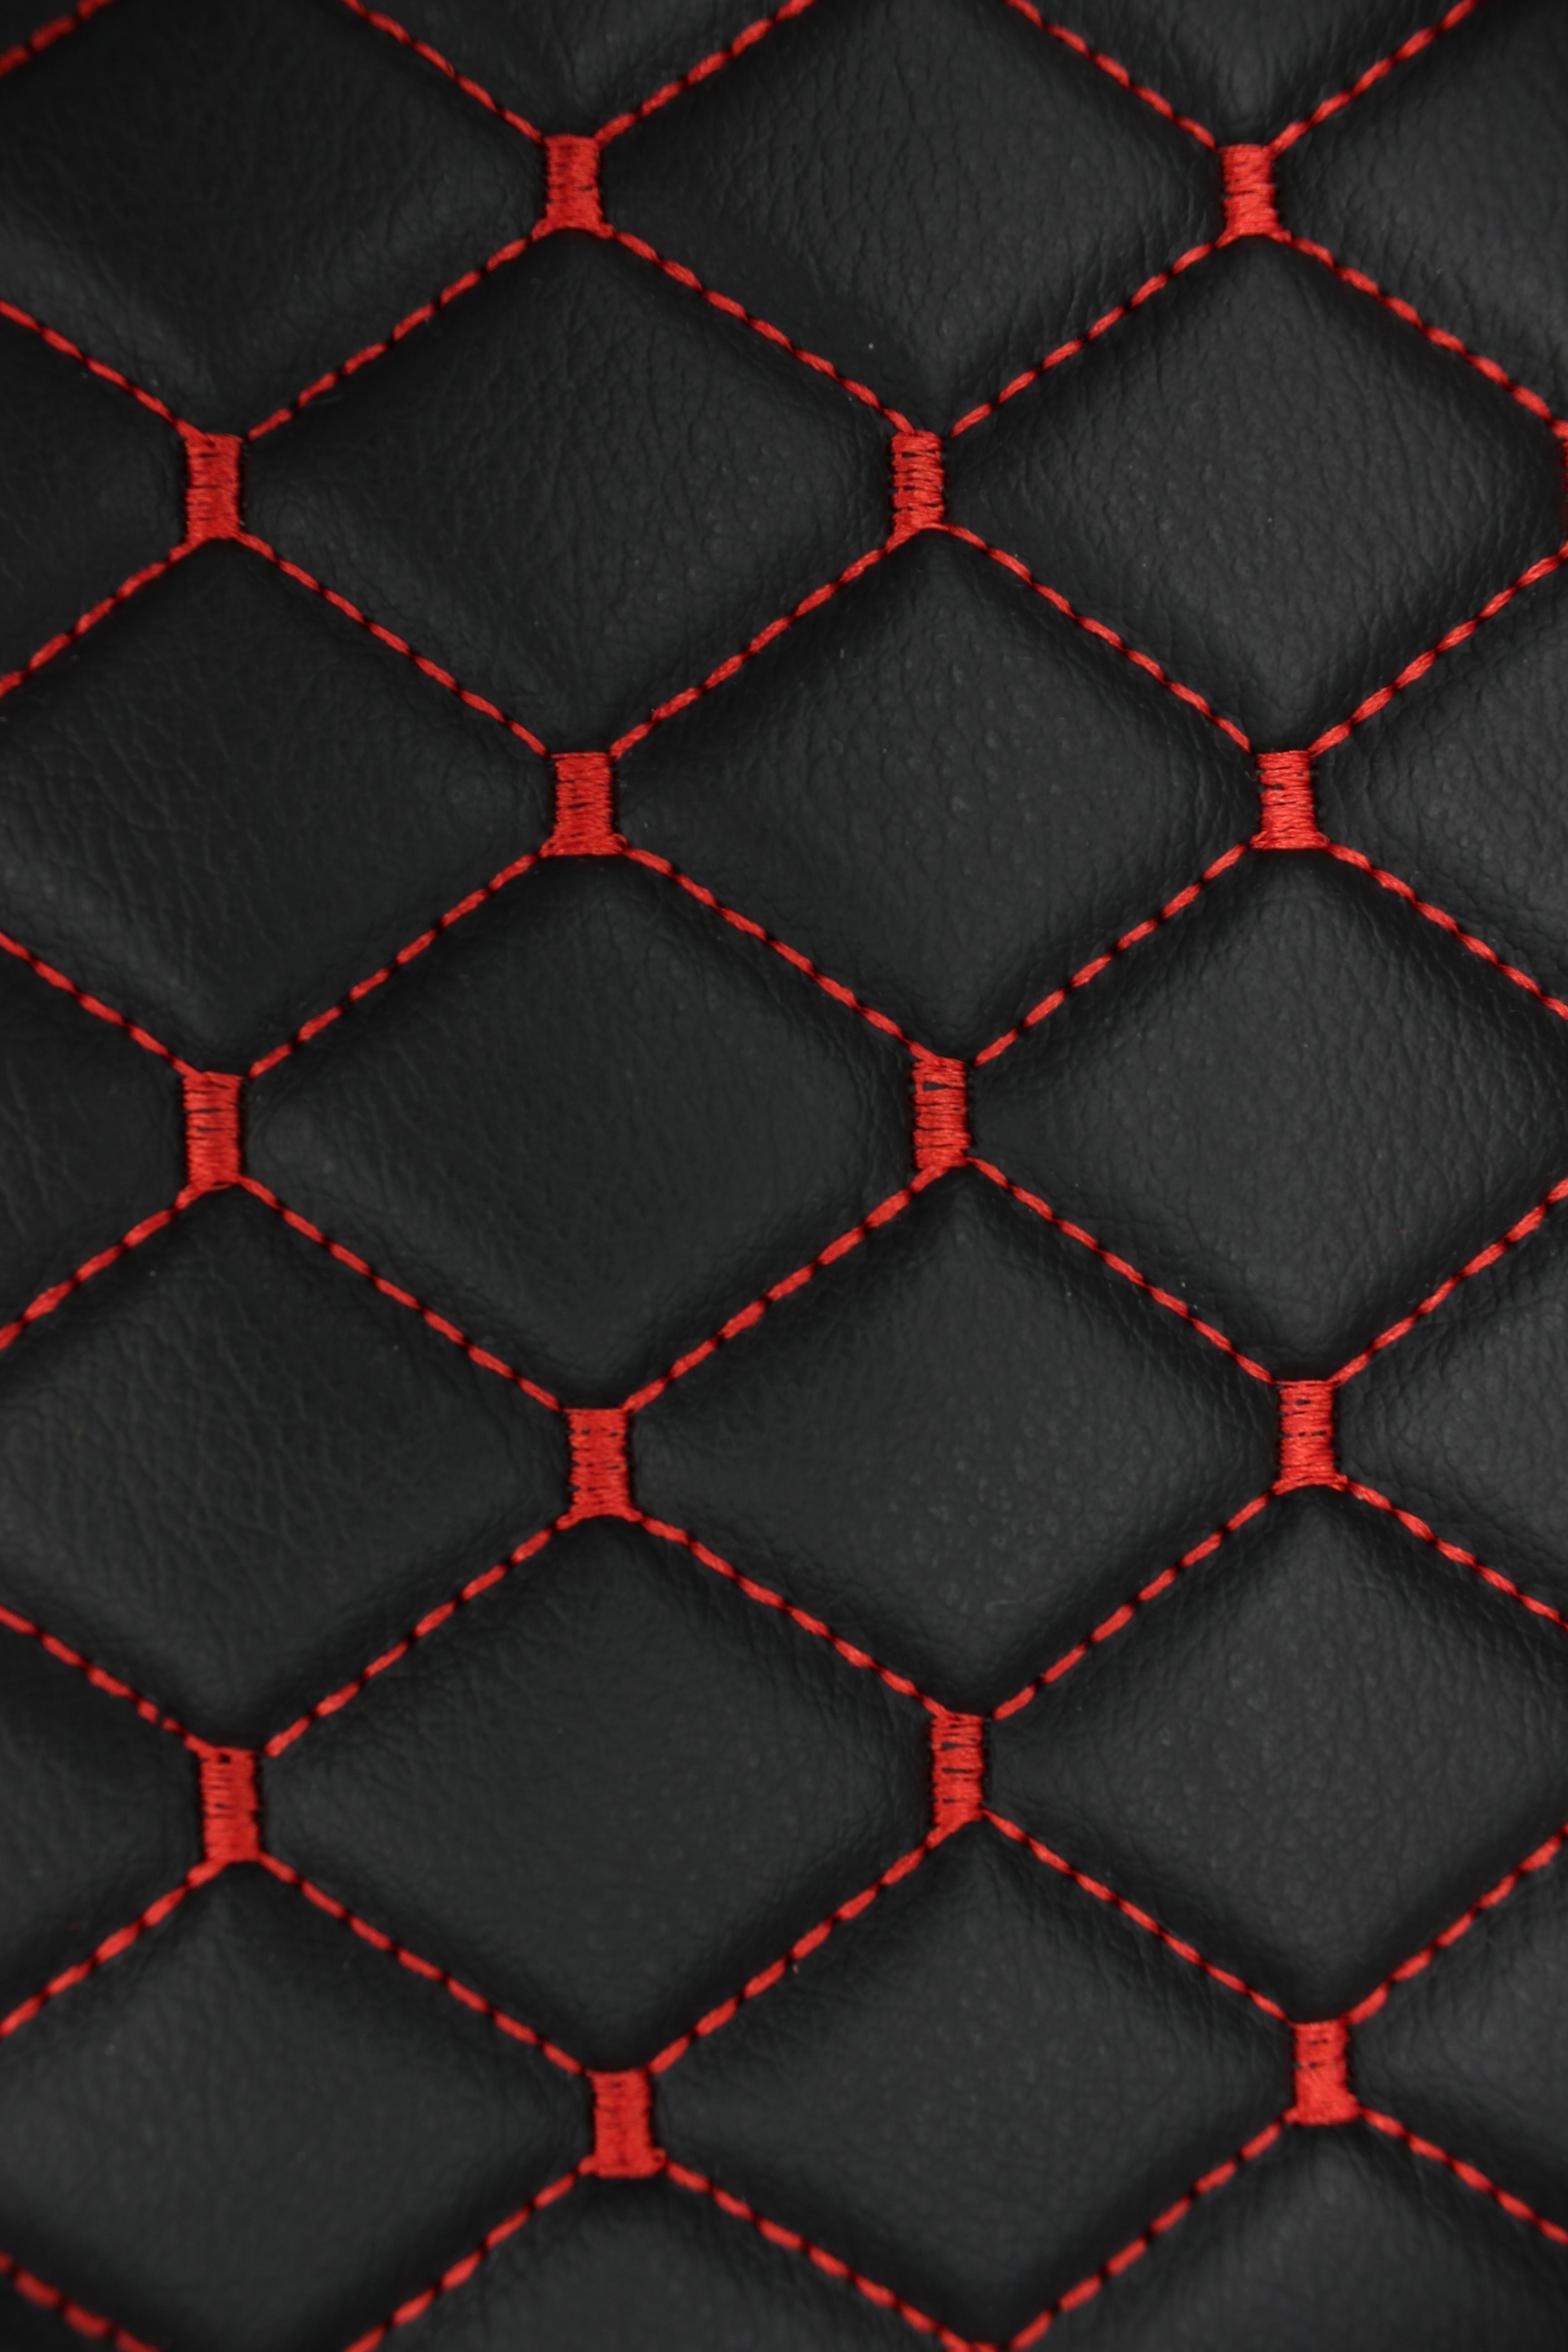 Red Quilted Black Vinyl Faux Leather Car Upholstery Fabric | 2"x2" 5x5cm Diamond Stitch with 4mm Foam Backing | 140cm Wide | Automotive Projects